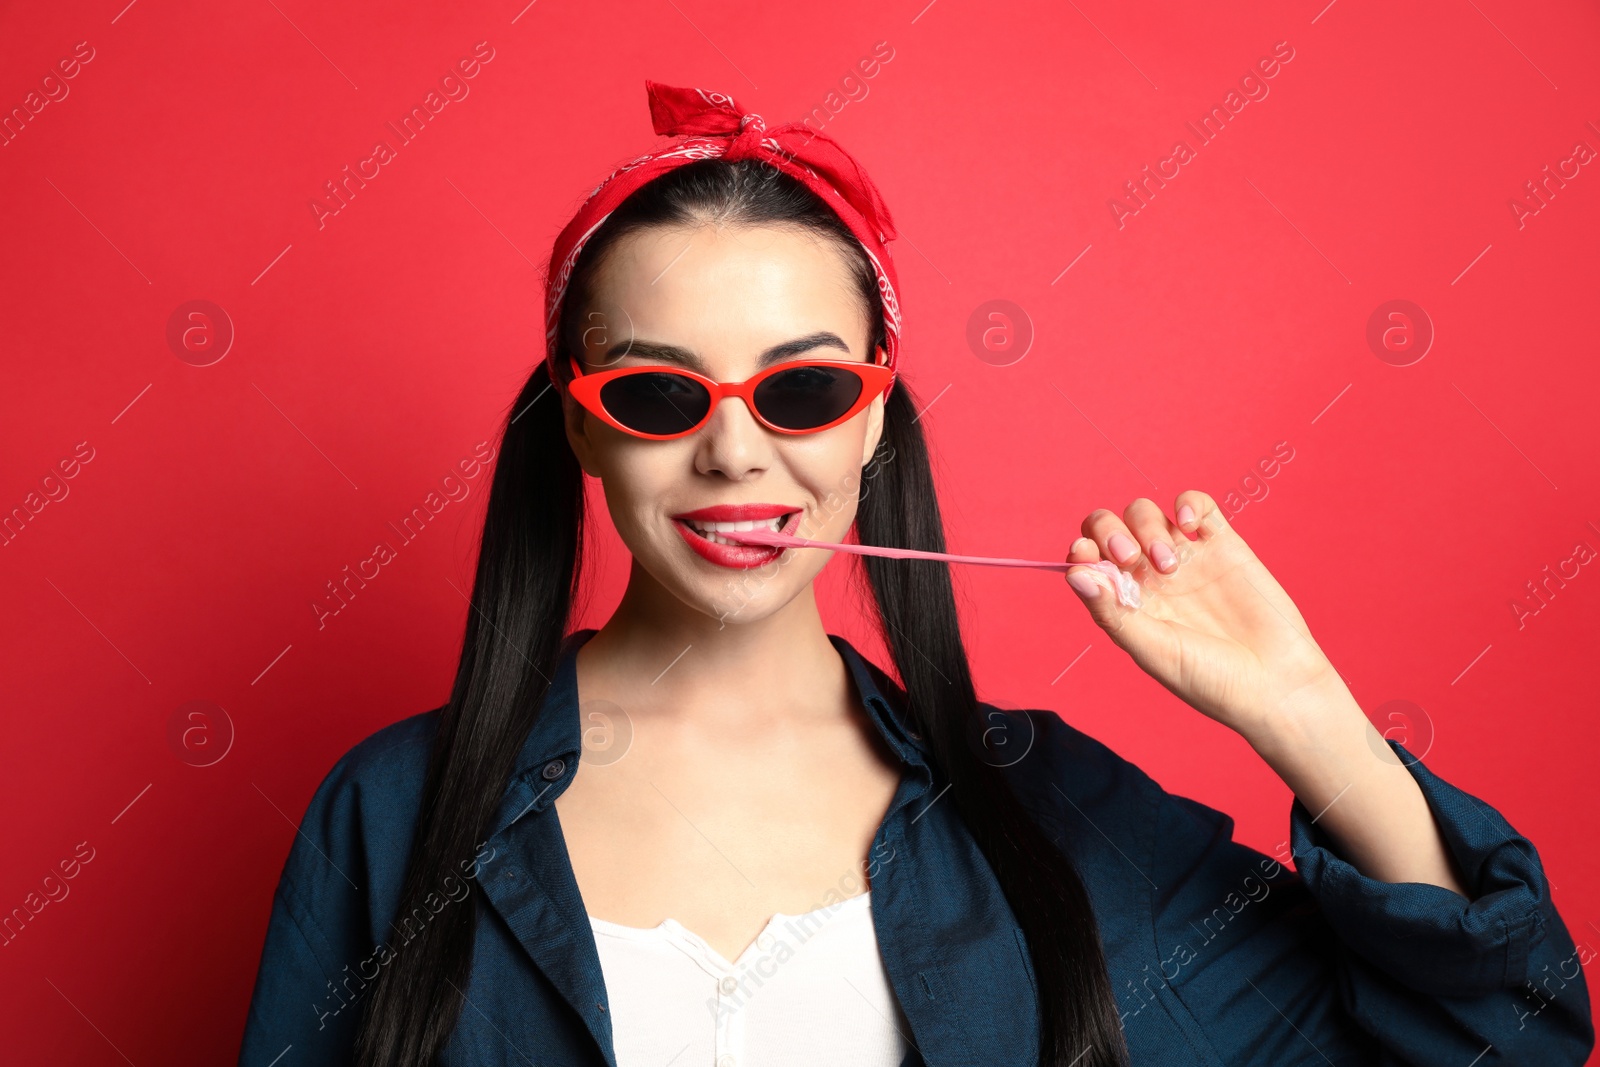 Photo of Fashionable young woman in pin up outfit chewing bubblegum on red background